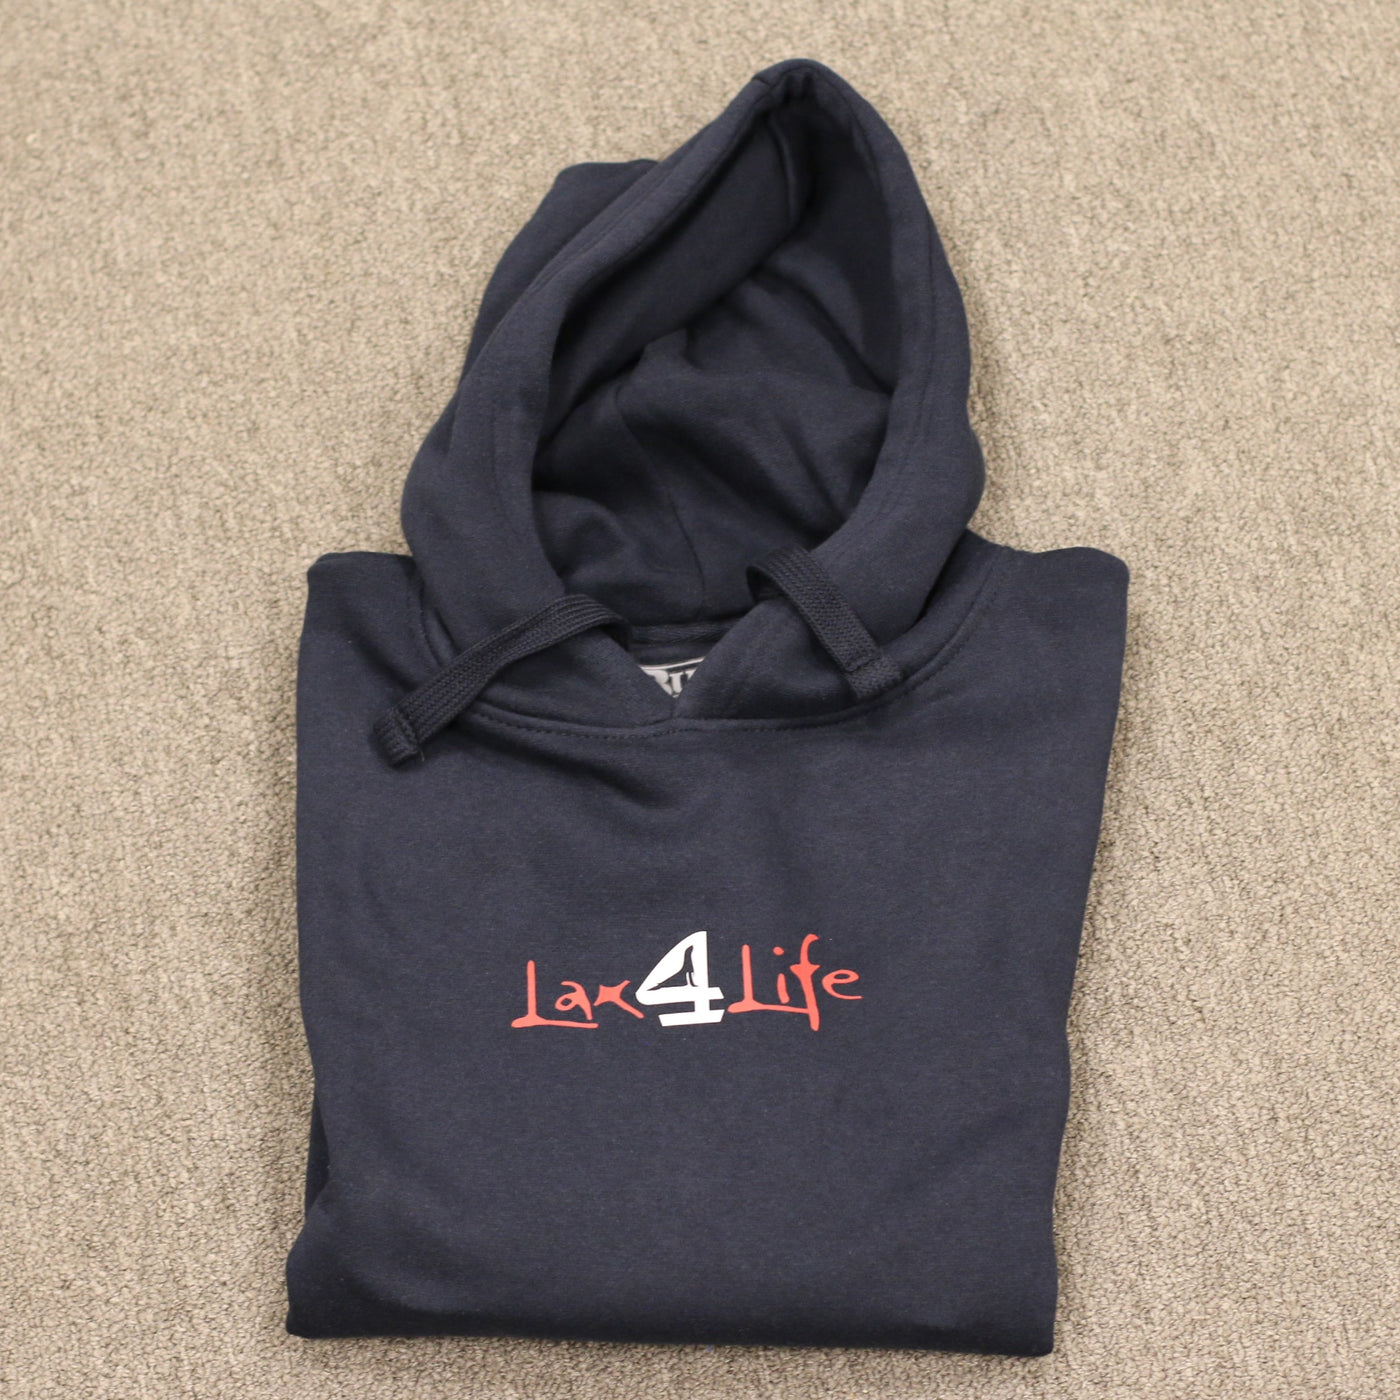 Lax 4 Life - The WANDerer - Adult Navy Hoodie